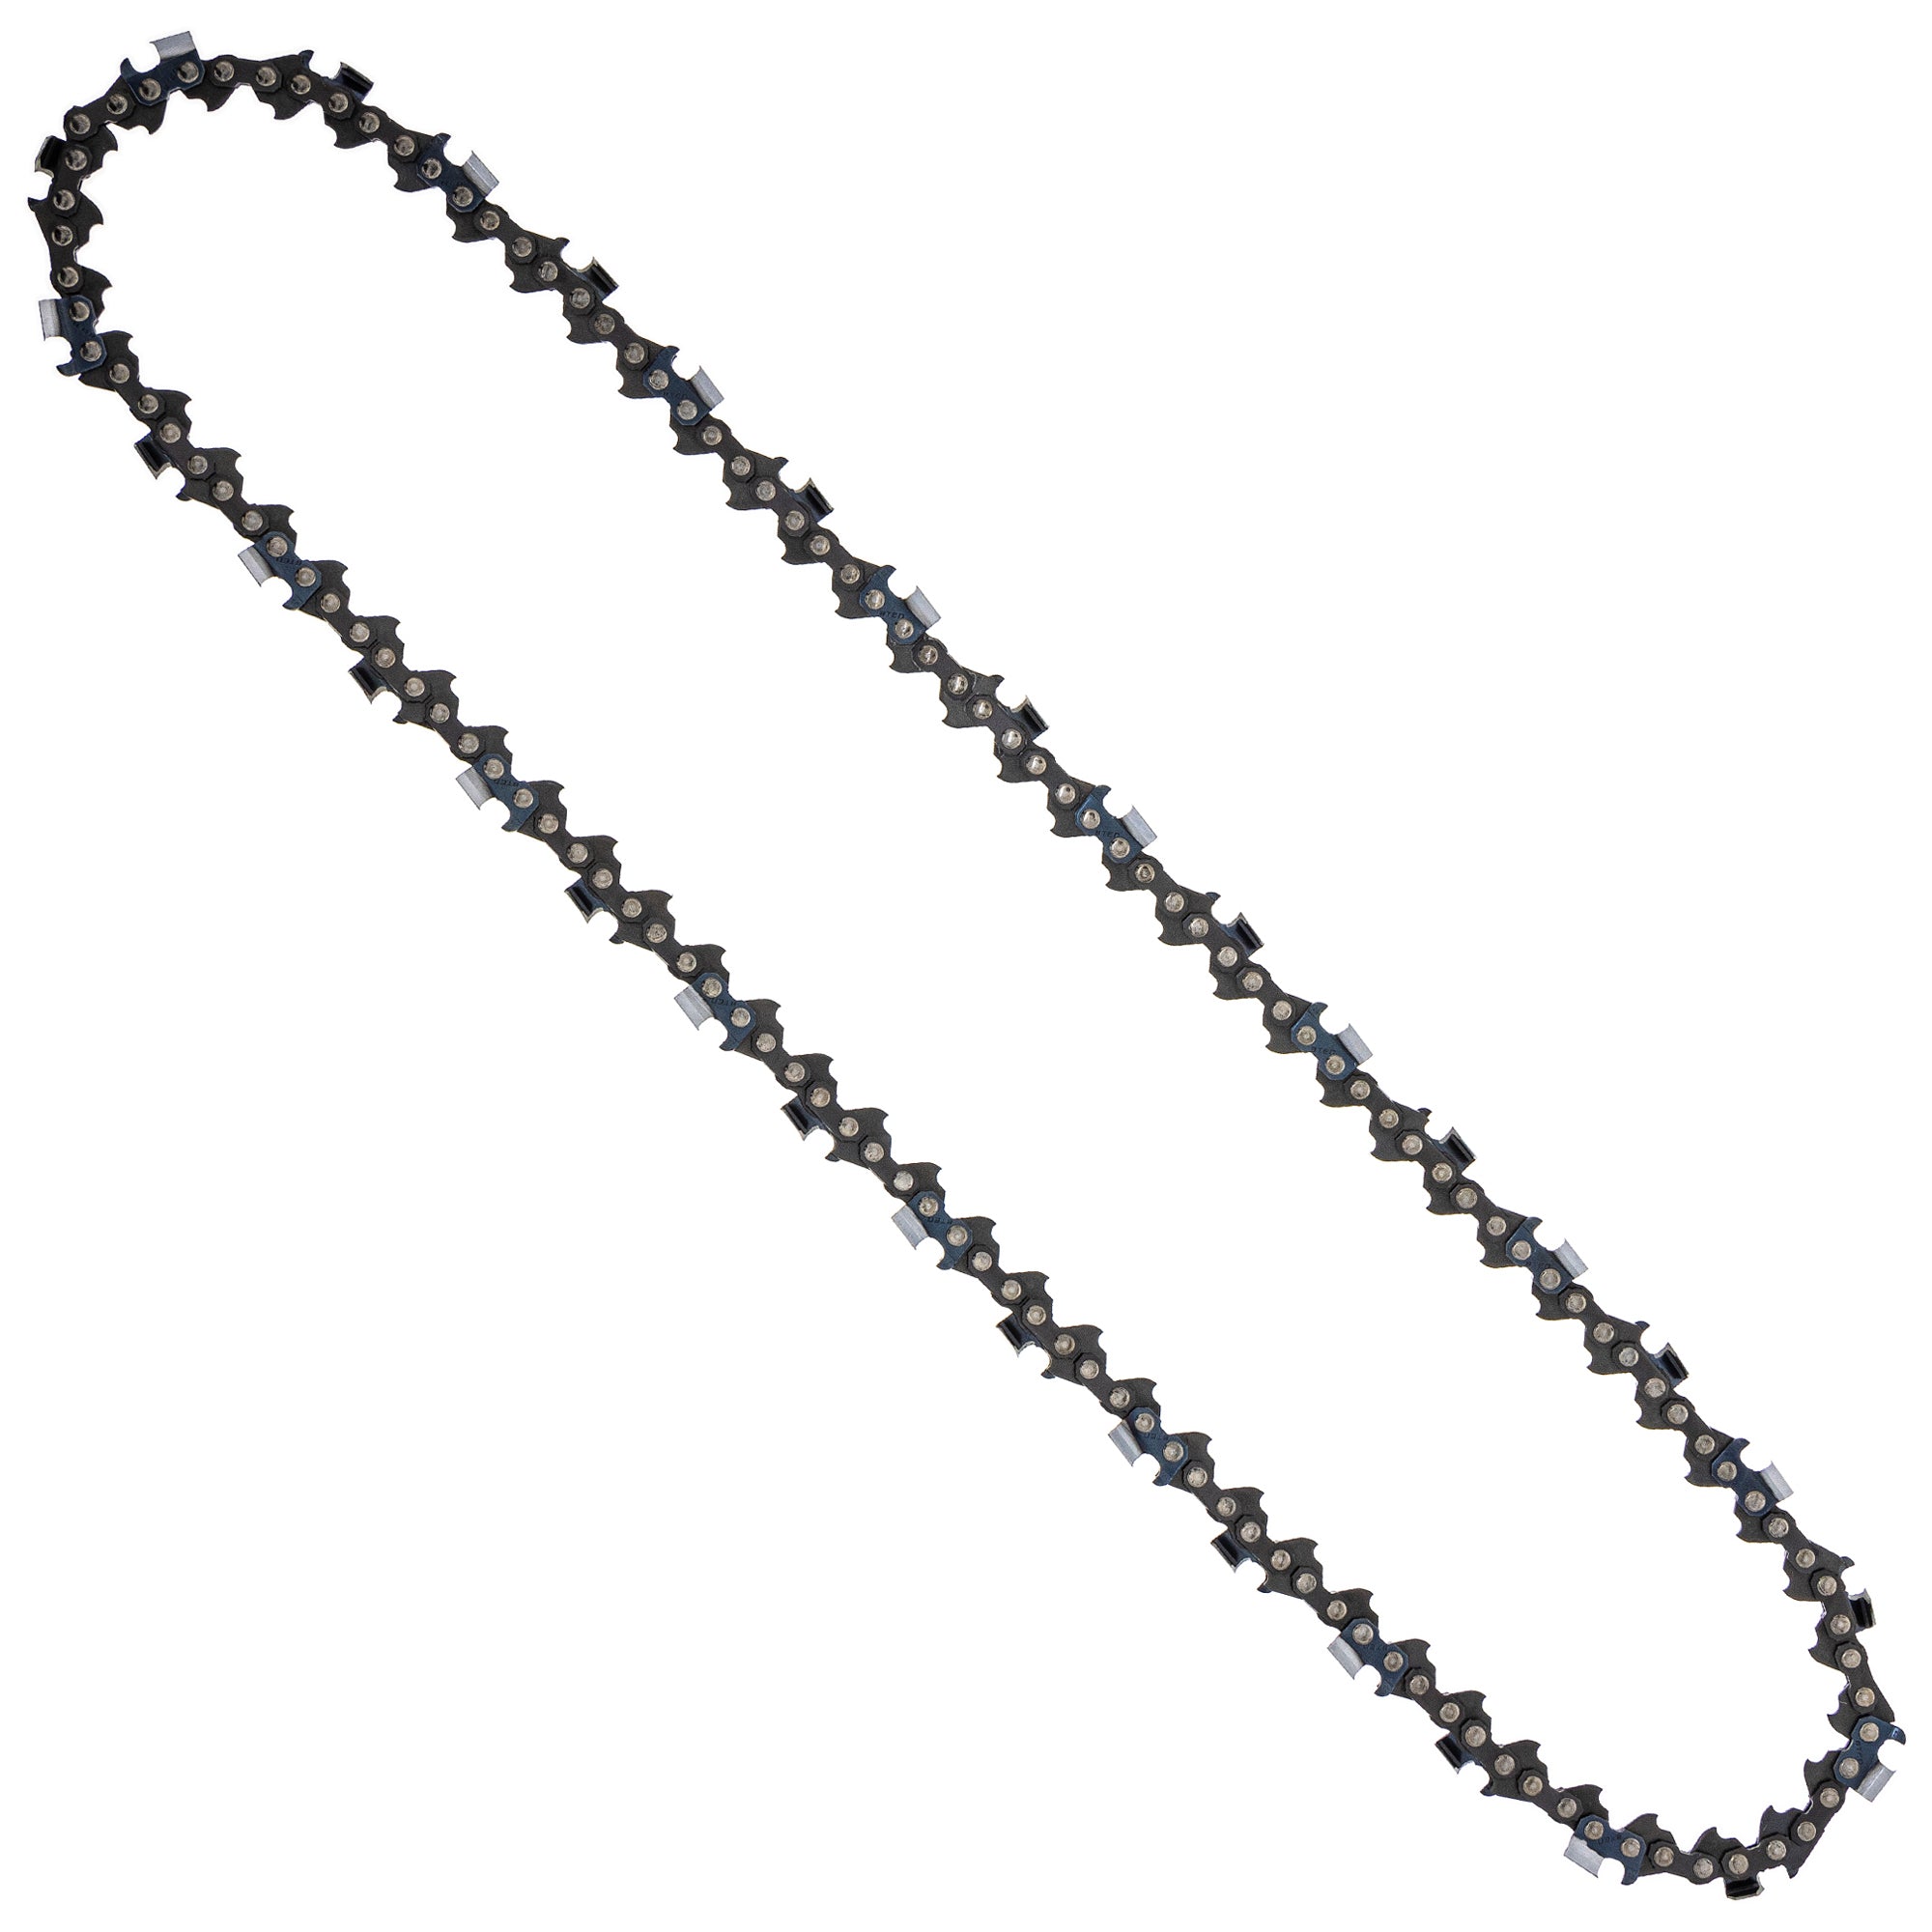 8TEN 810-CCC2218H Chain 4-Pack for zOTHER Oregon Husqvarna Poulan